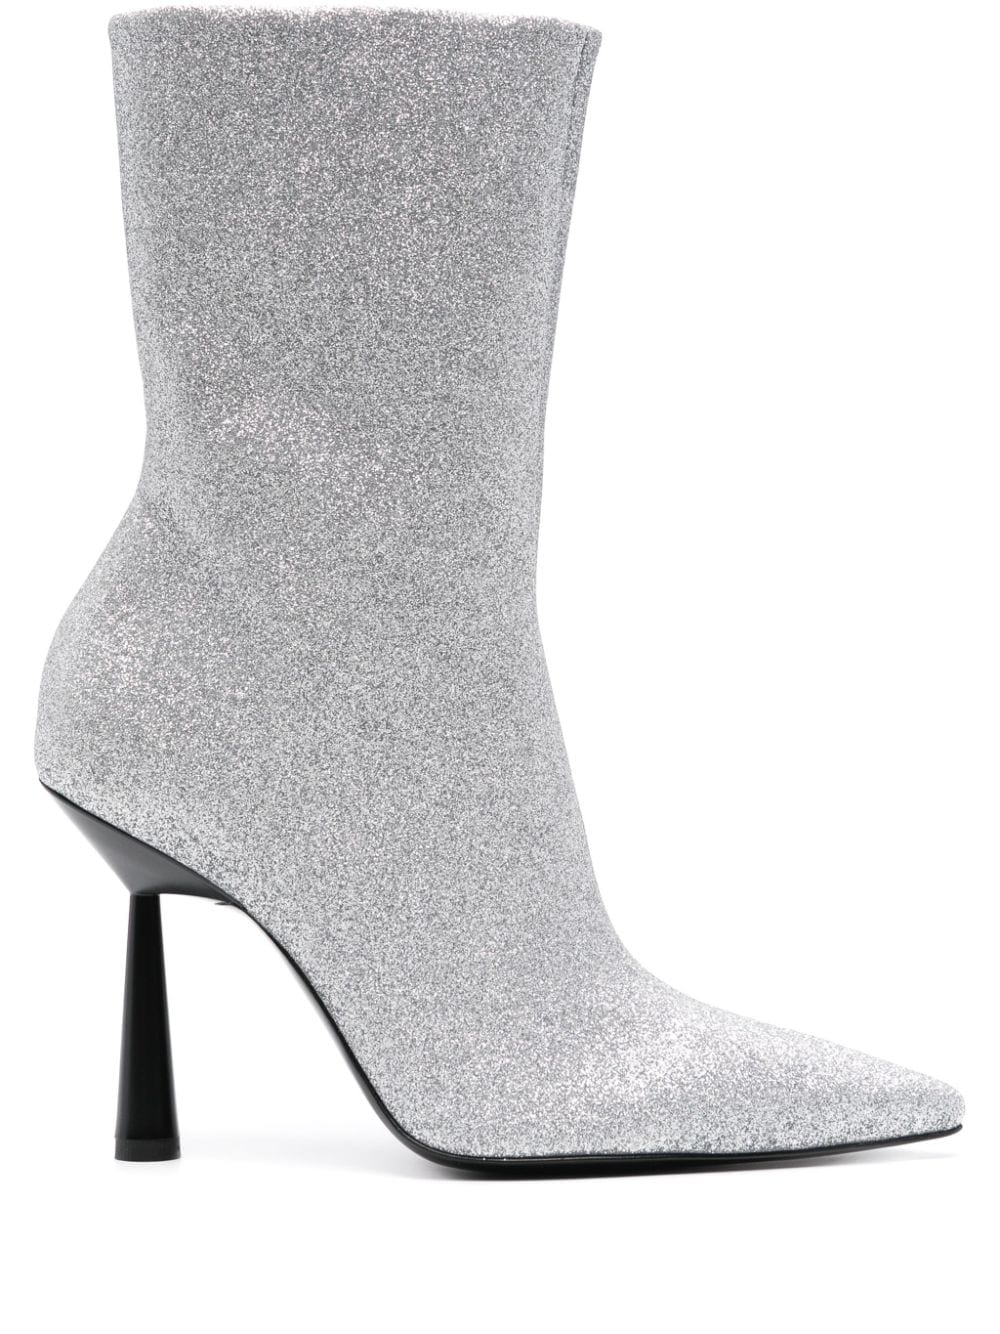 GIABORGHINI Rosie 100mm glittered ankle boots